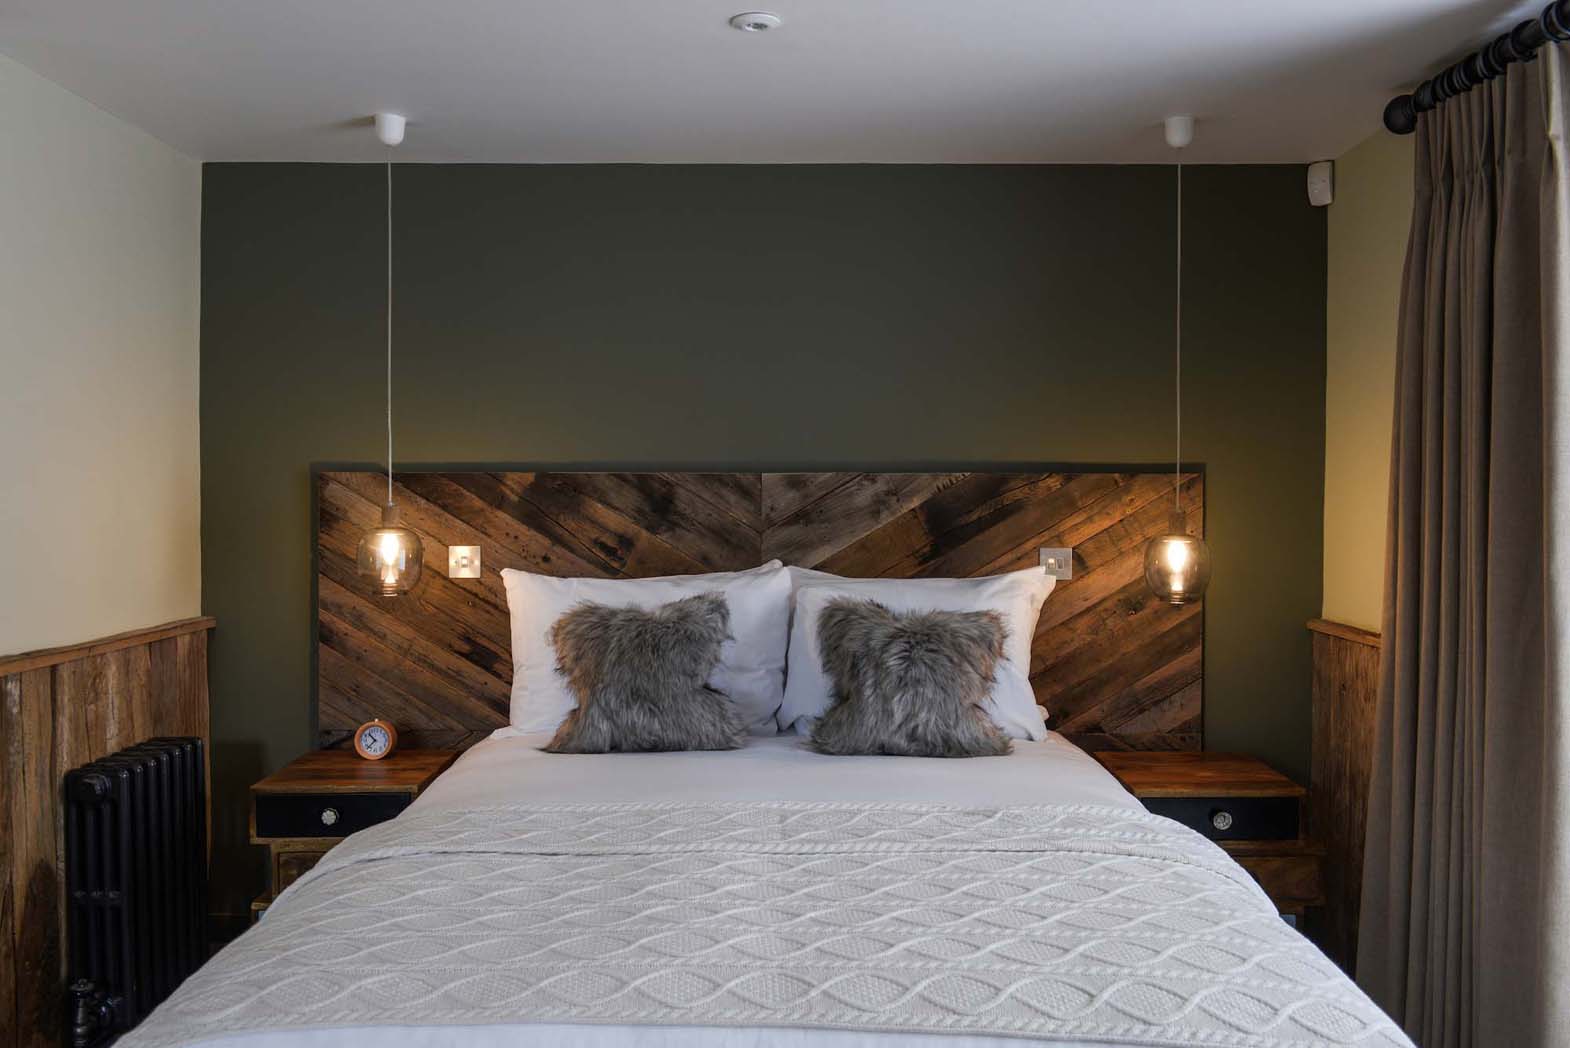 Chew - King sized bed with white linen, Wooden features, ambient lighting and fluffy pillows